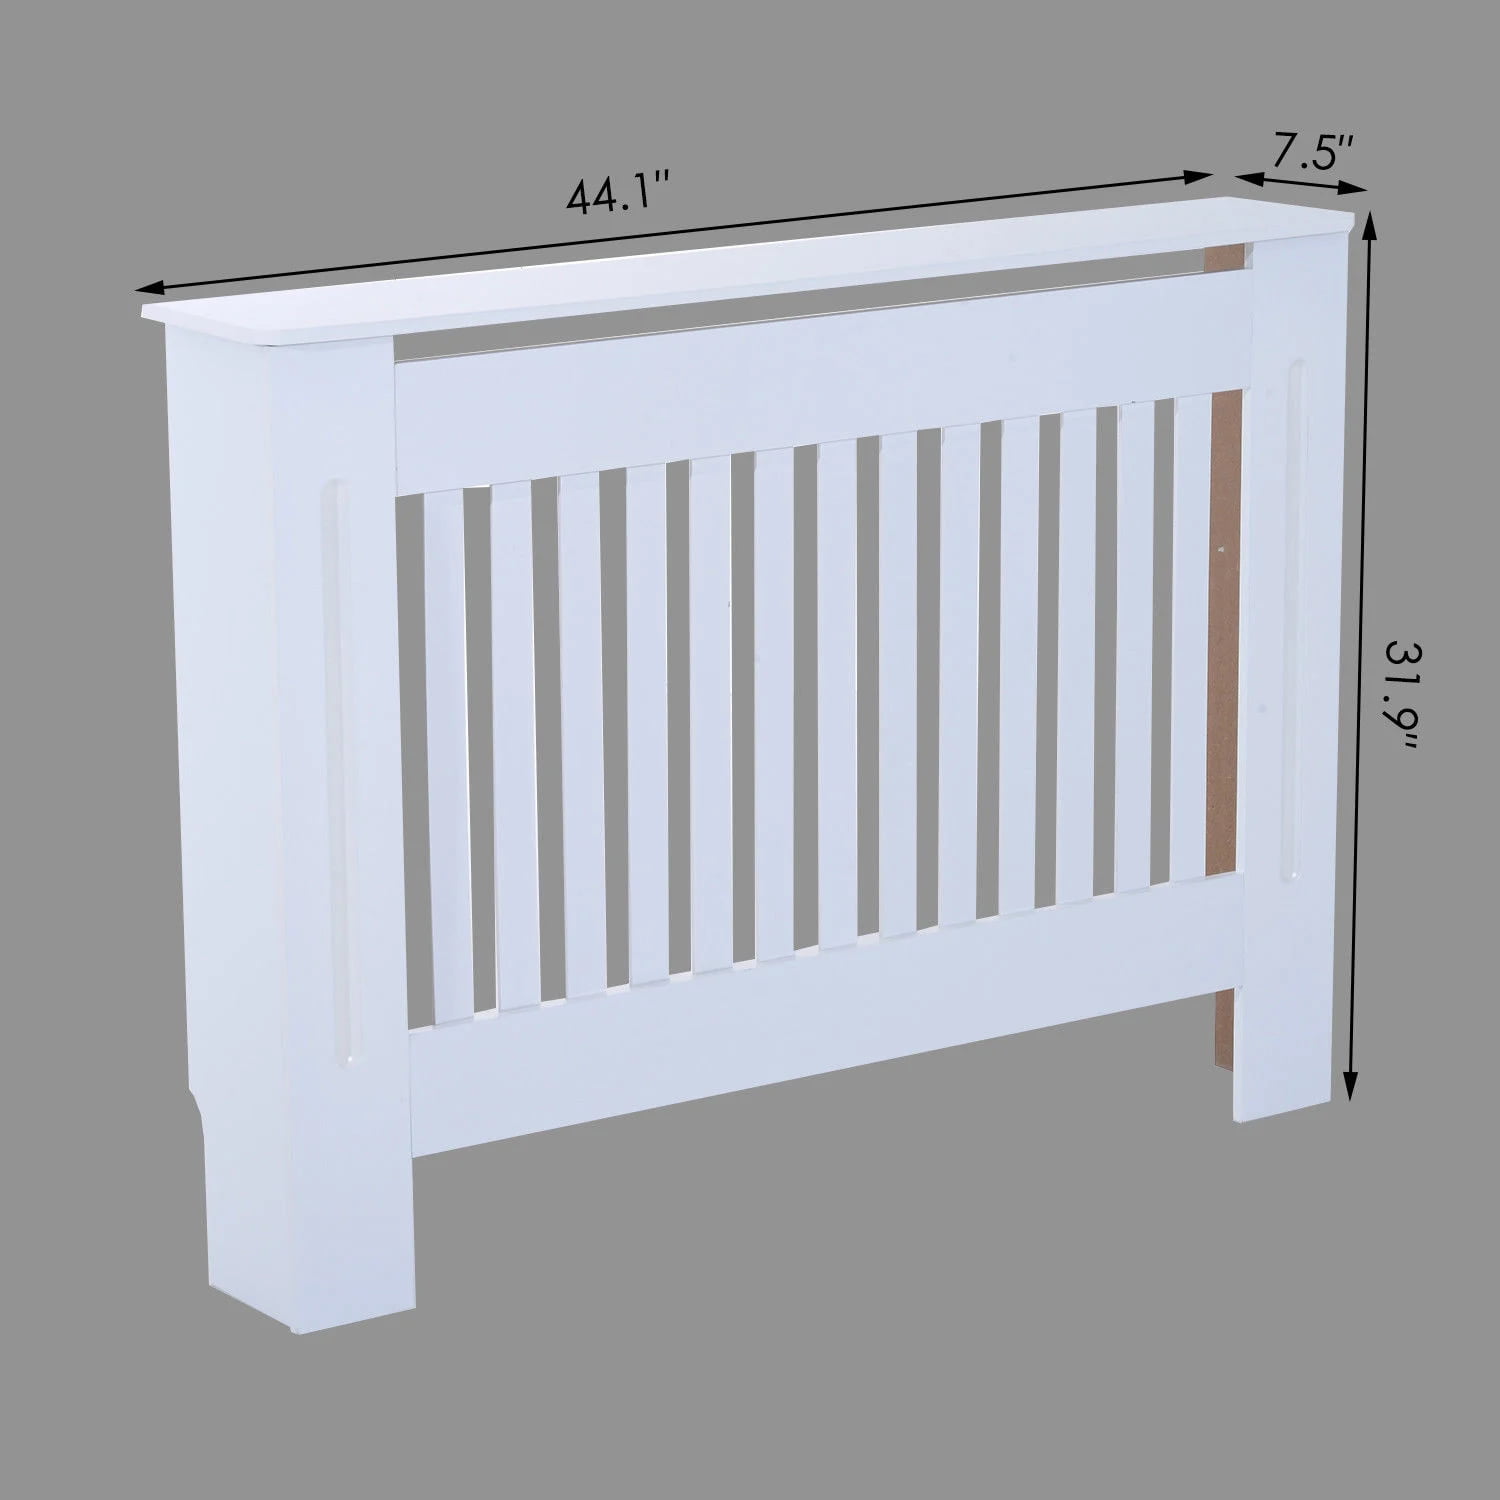 Medium Size H82 x W112x D19 cm White Painted Wood MDF Radiator Heater Cover Case Cabinet Vertical Grill Slatted Vent Protector Shelf Horizontal Slats Storage for Home Office Traditional Design 